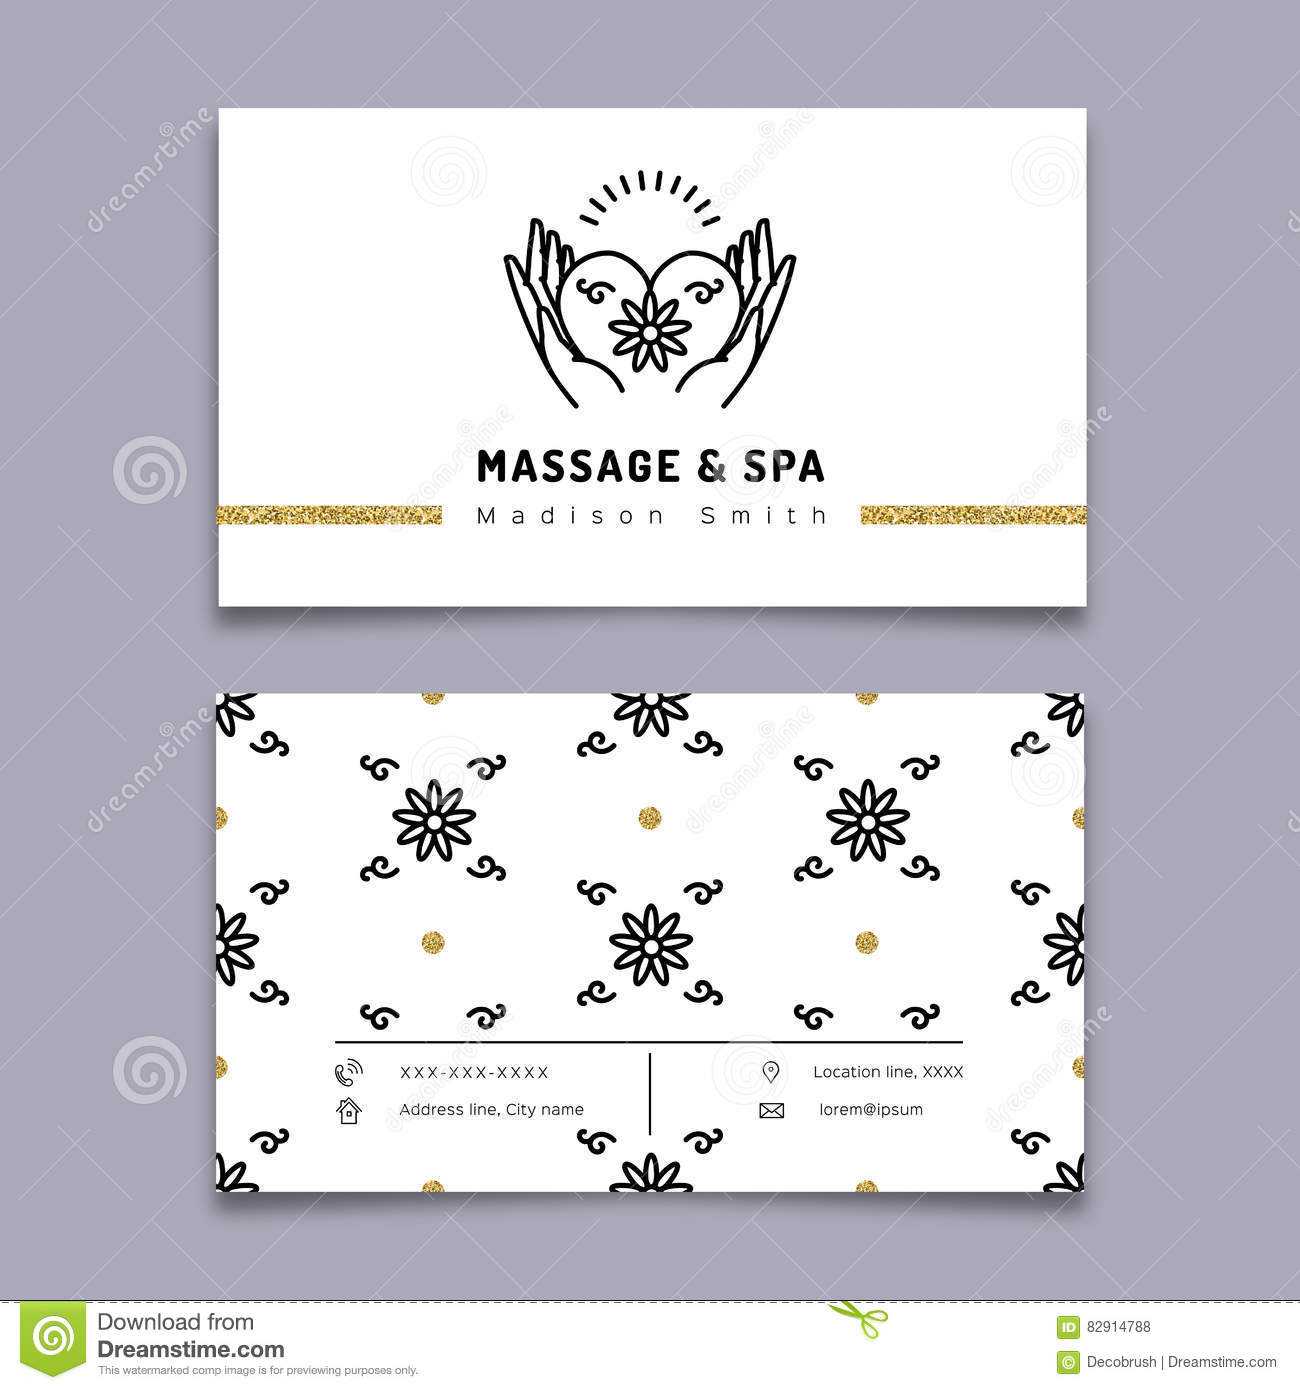 Massage And Spa Therapy Business Card Template, Trendy Line Throughout Massage Therapy Business Card Templates